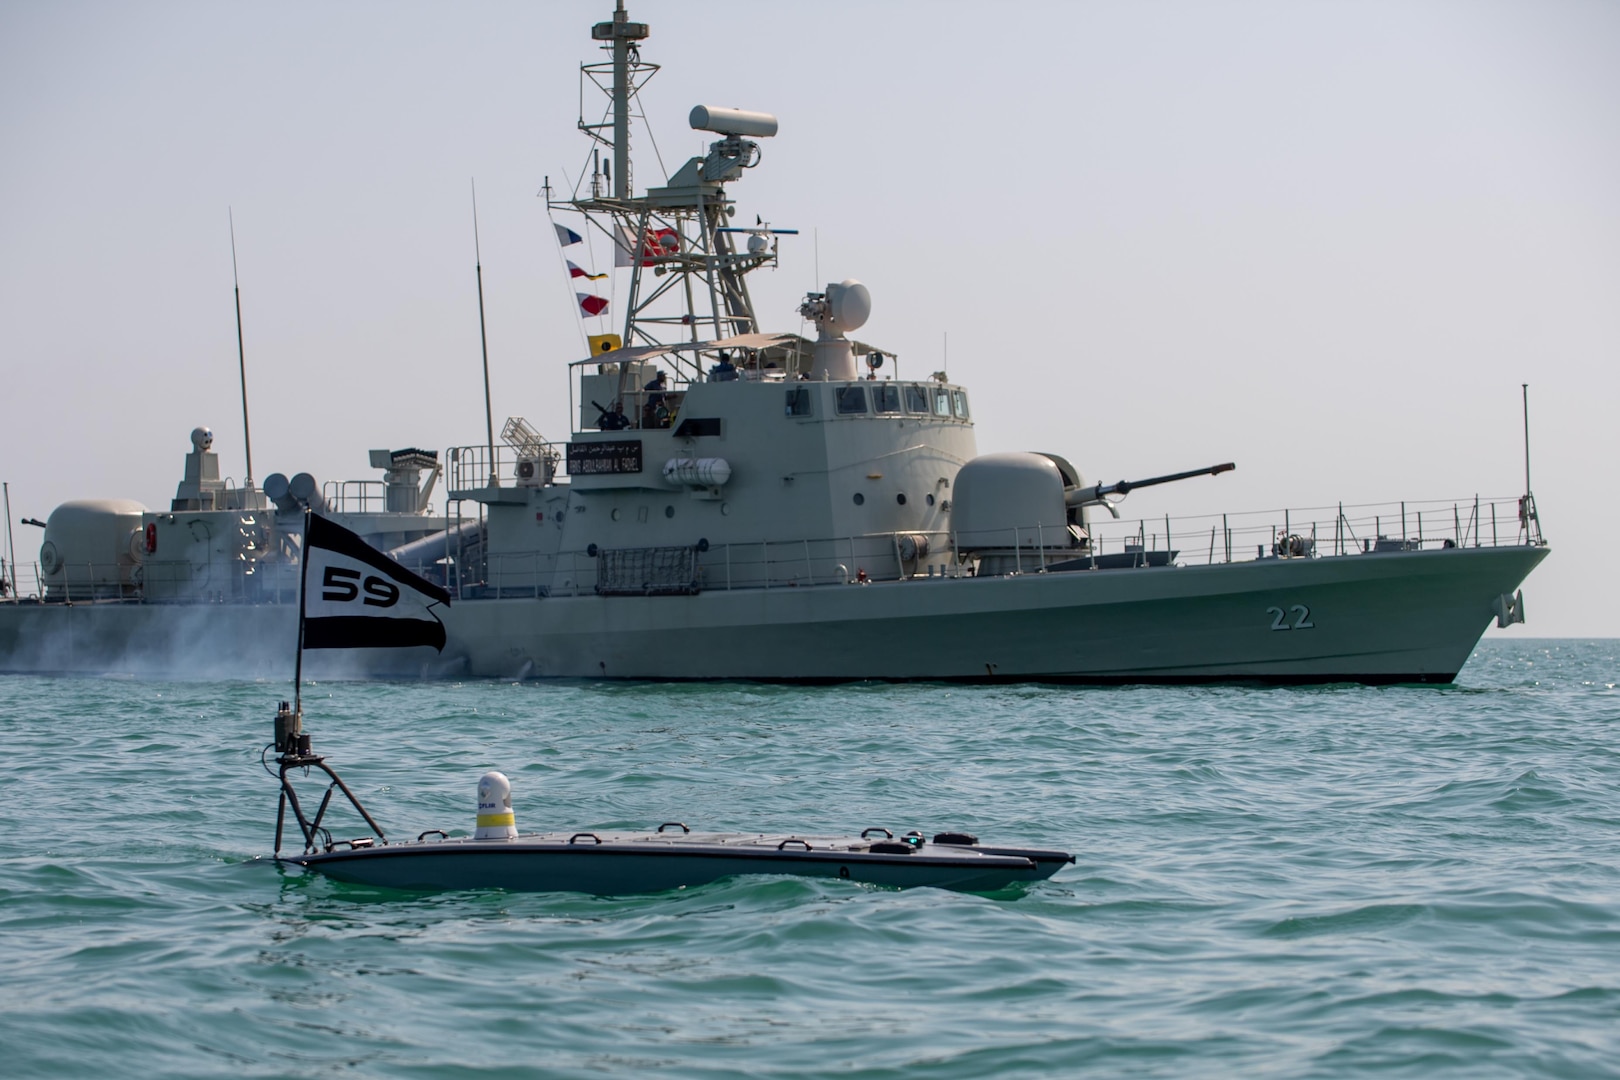 An unmanned vessel floats in front of a ship.